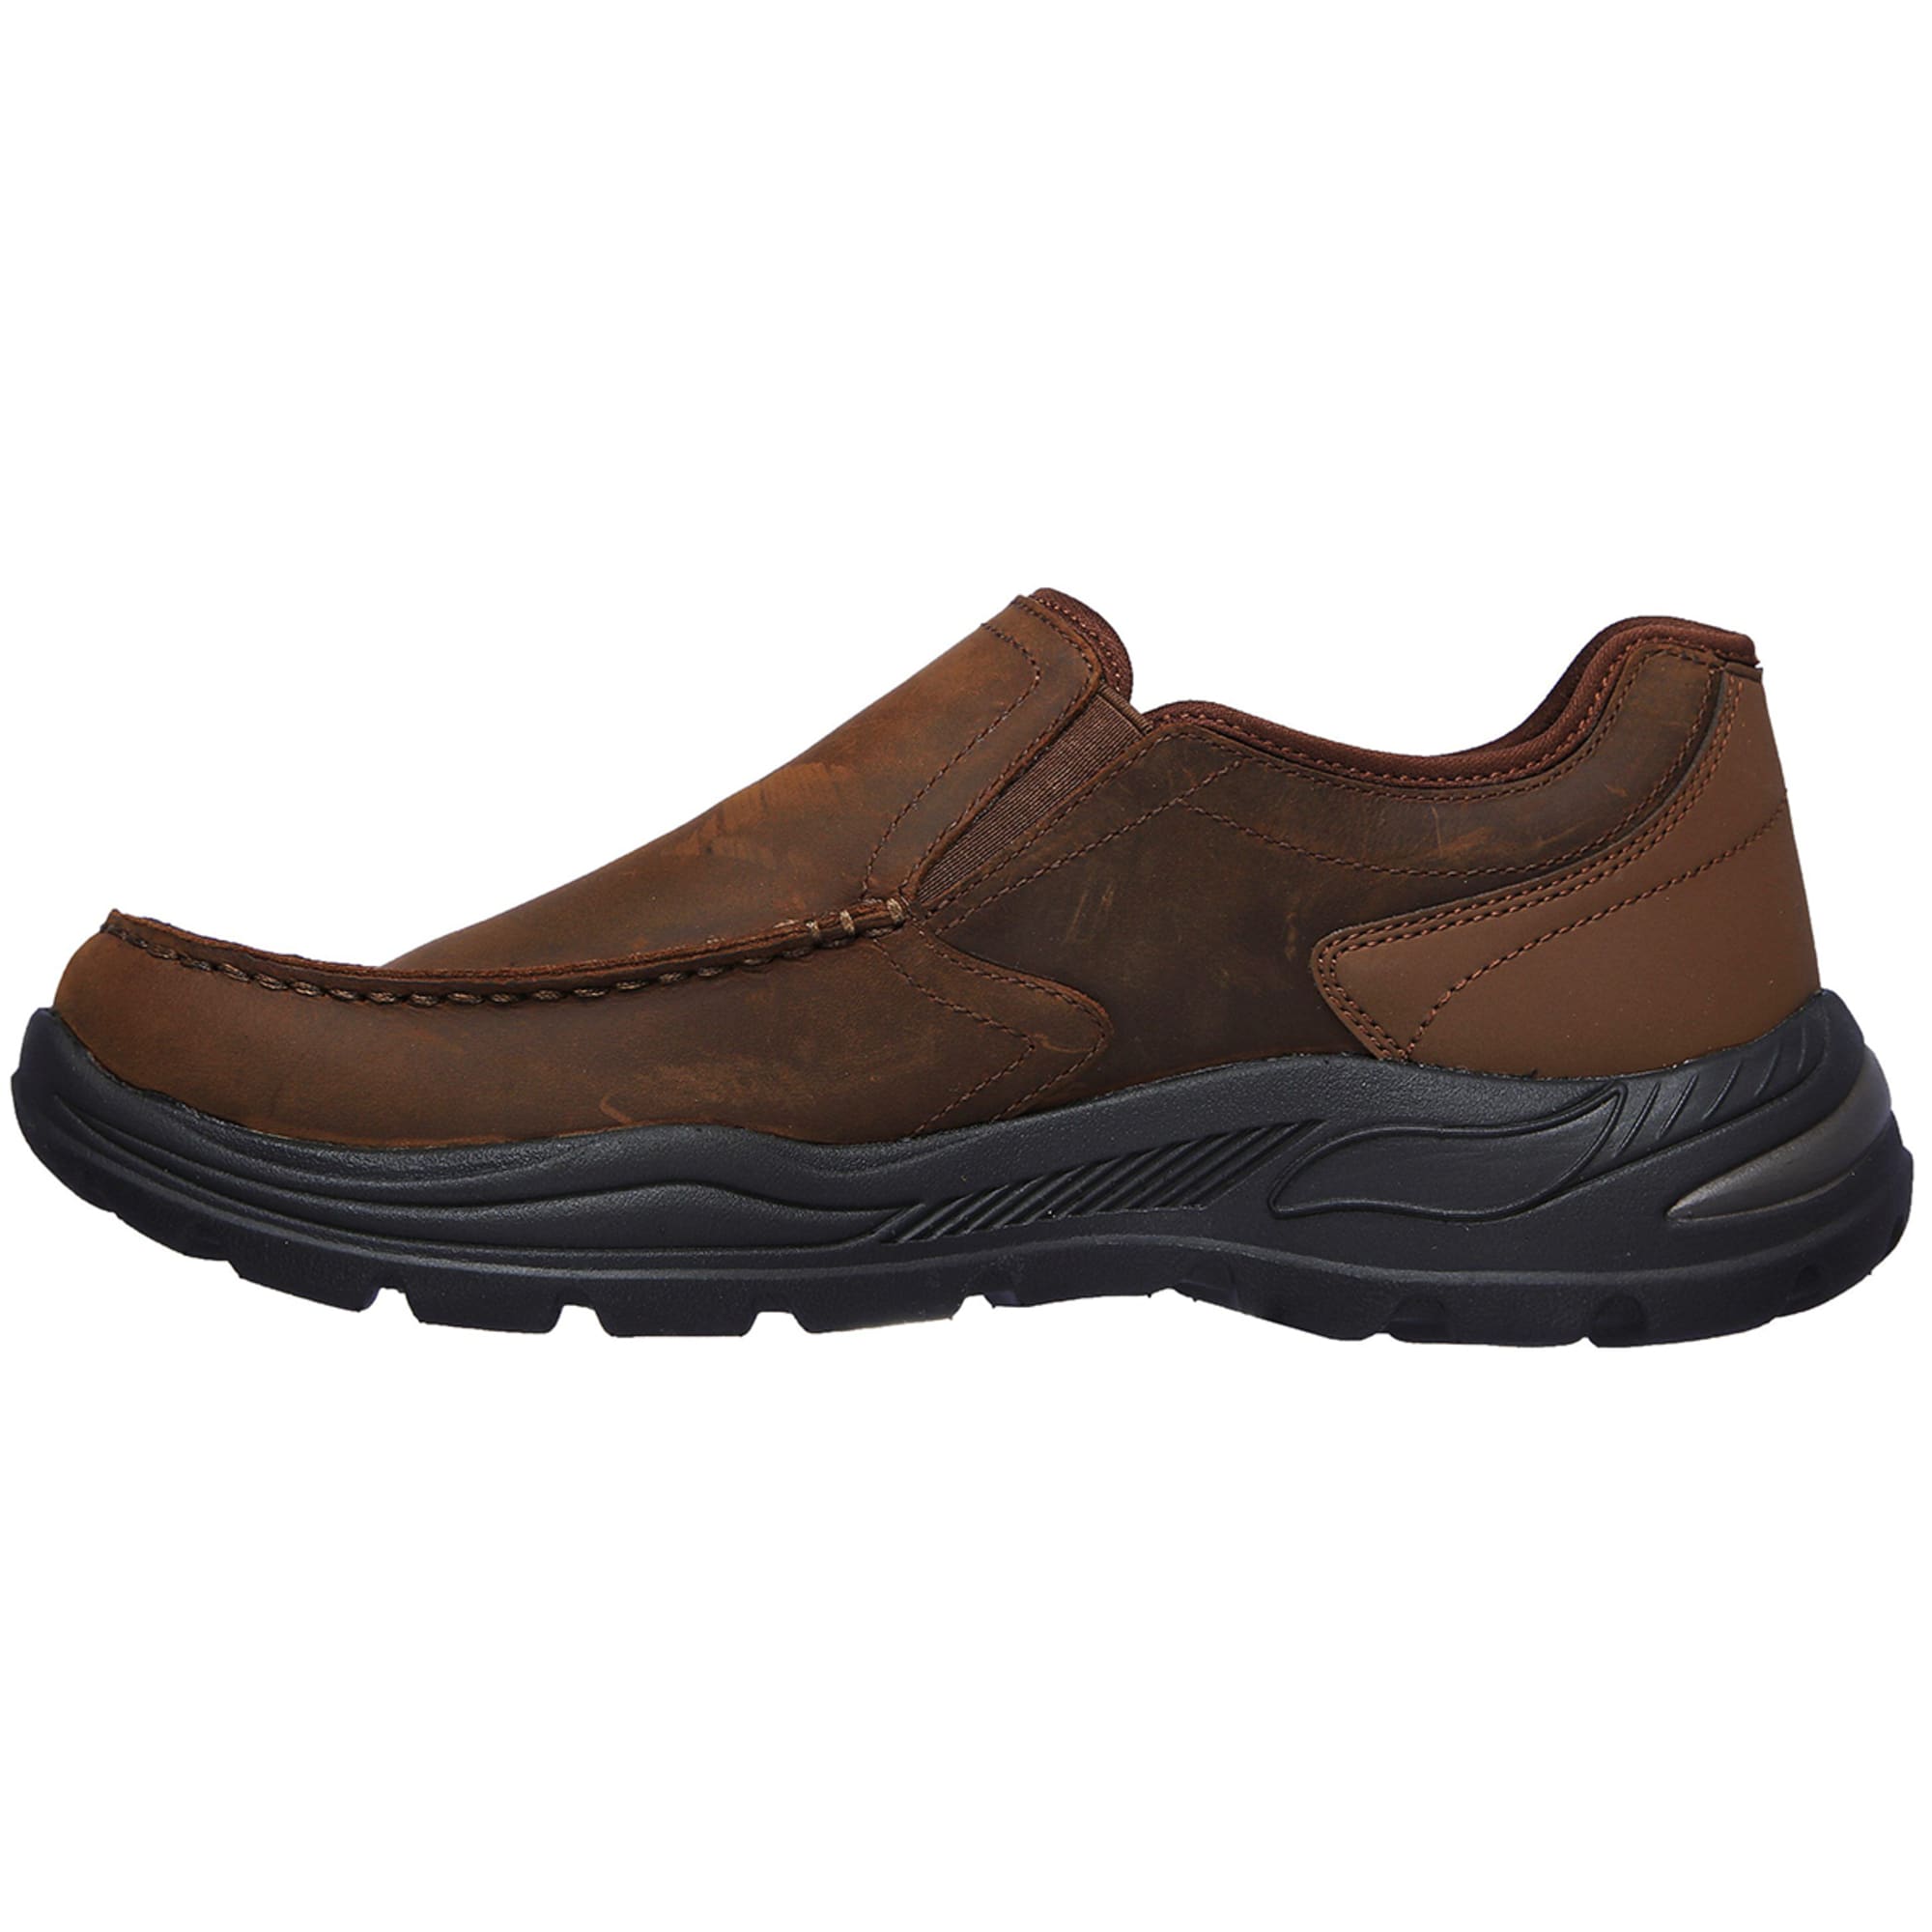 Skechers Arch Fit Motley-Hust